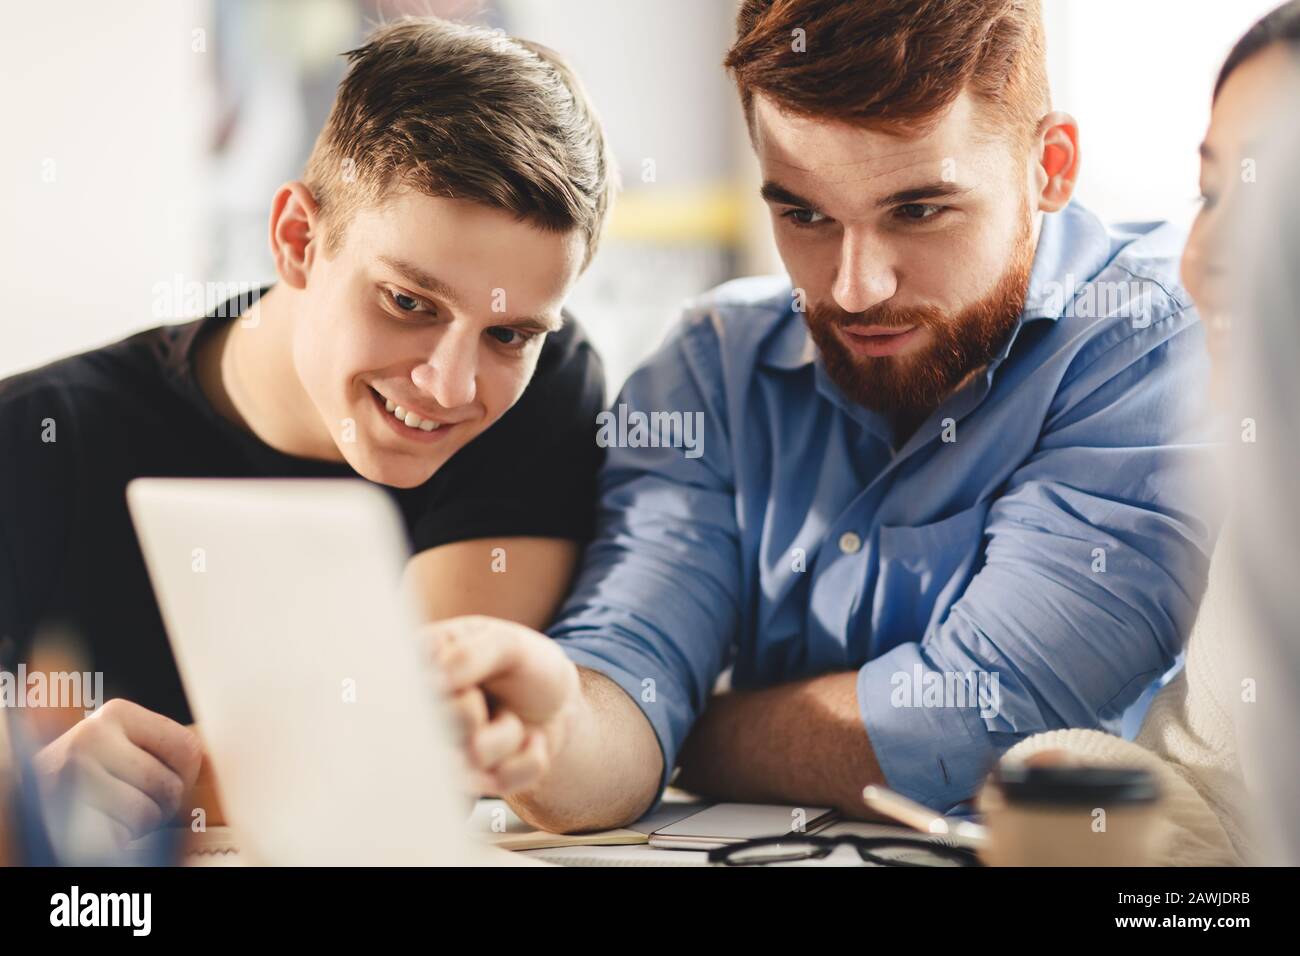 Smart student helping his classmate with homework Stock Photo